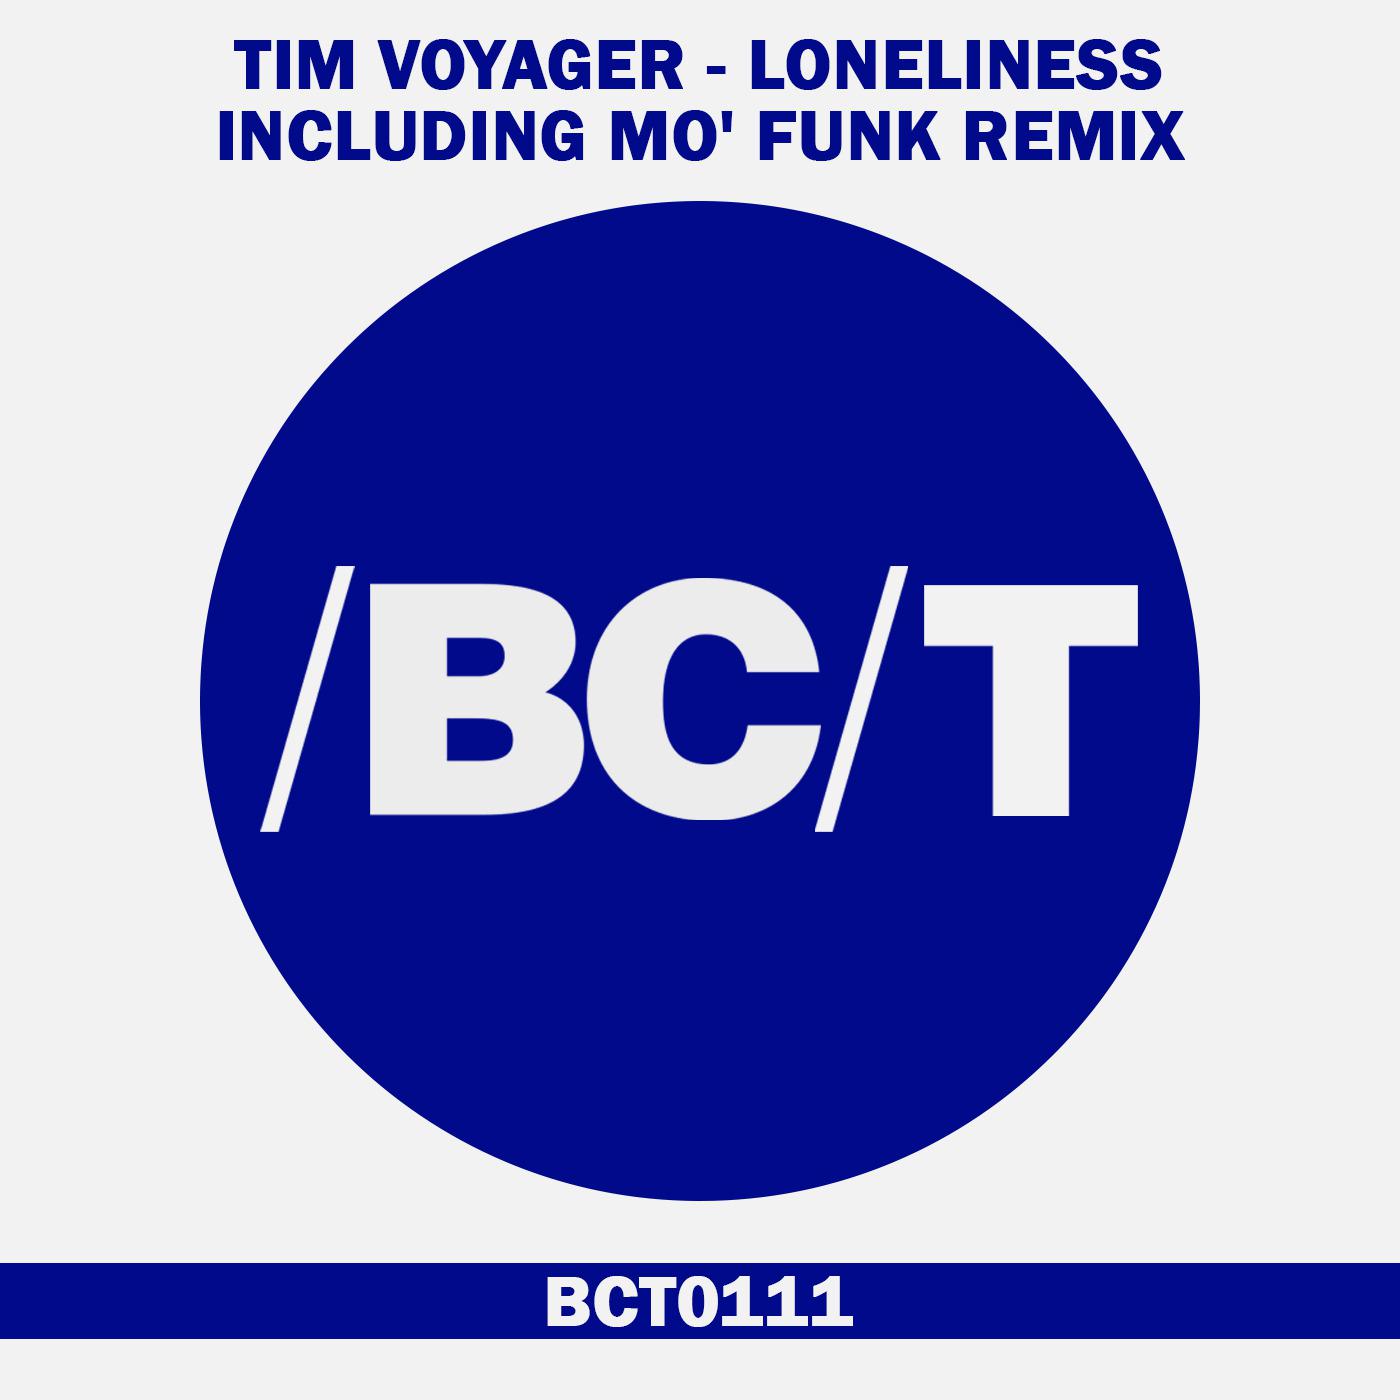 Tim Voyager - Loneliness